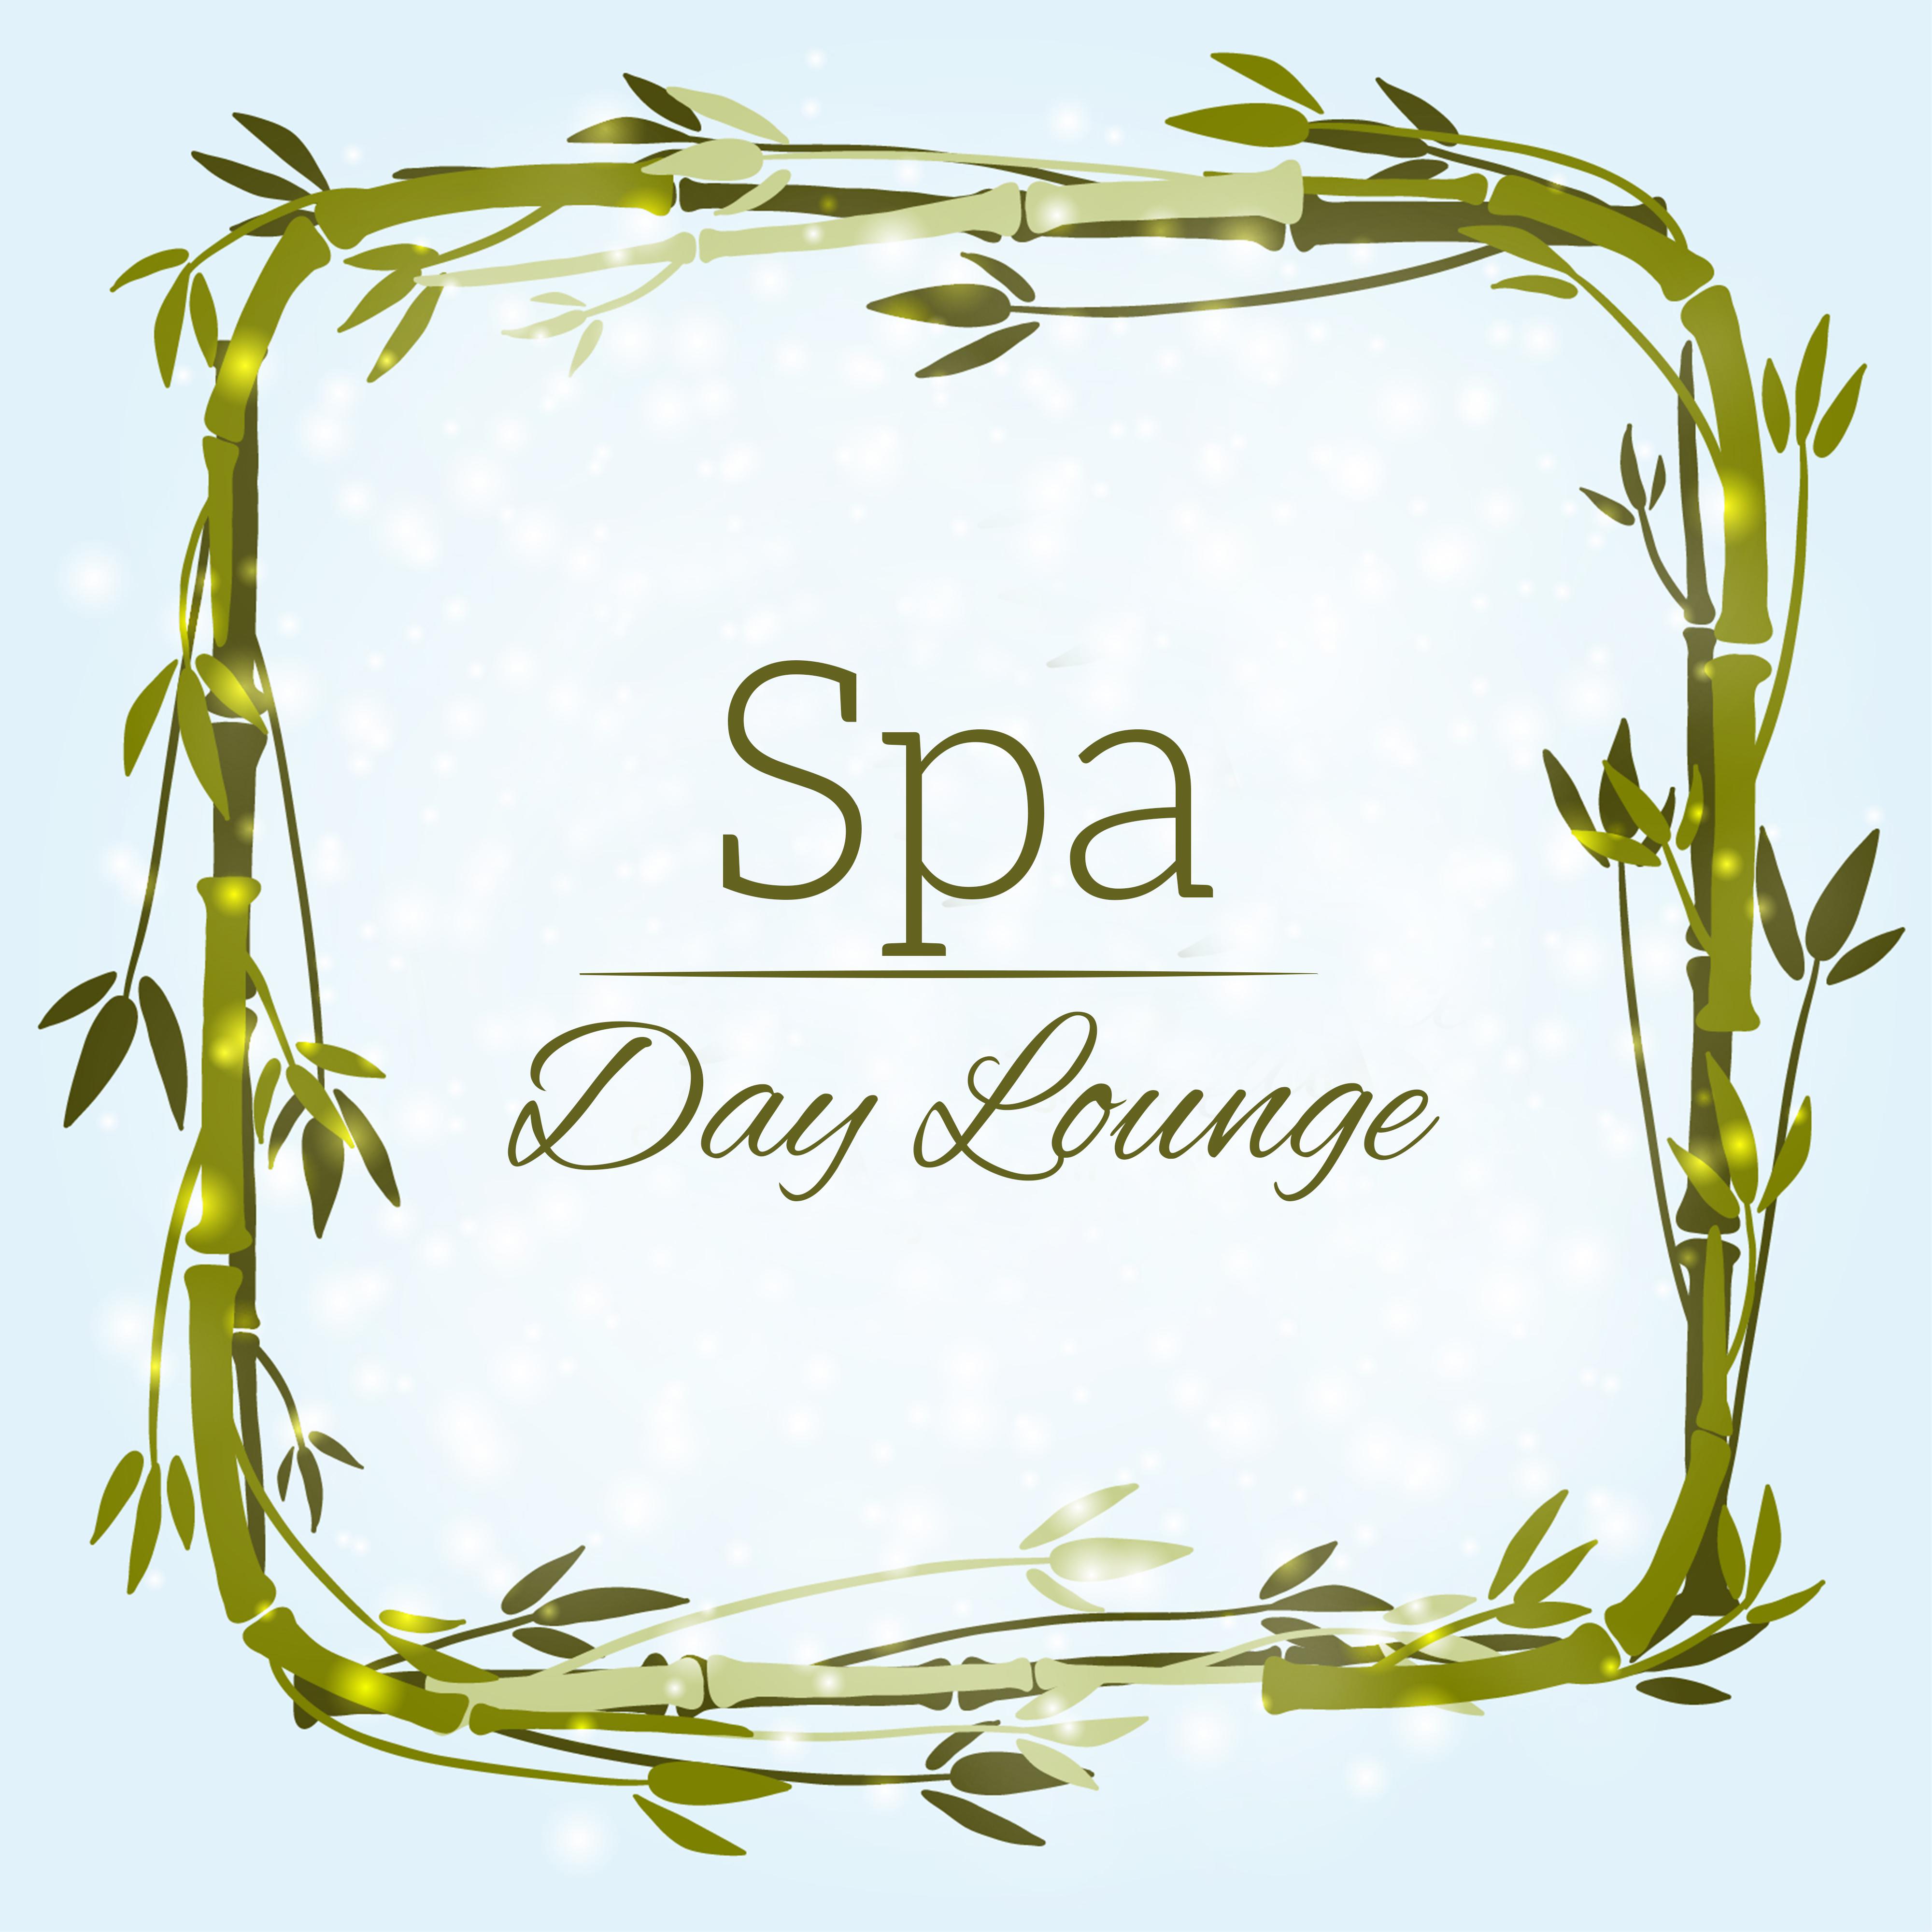 Spa Day Lounge